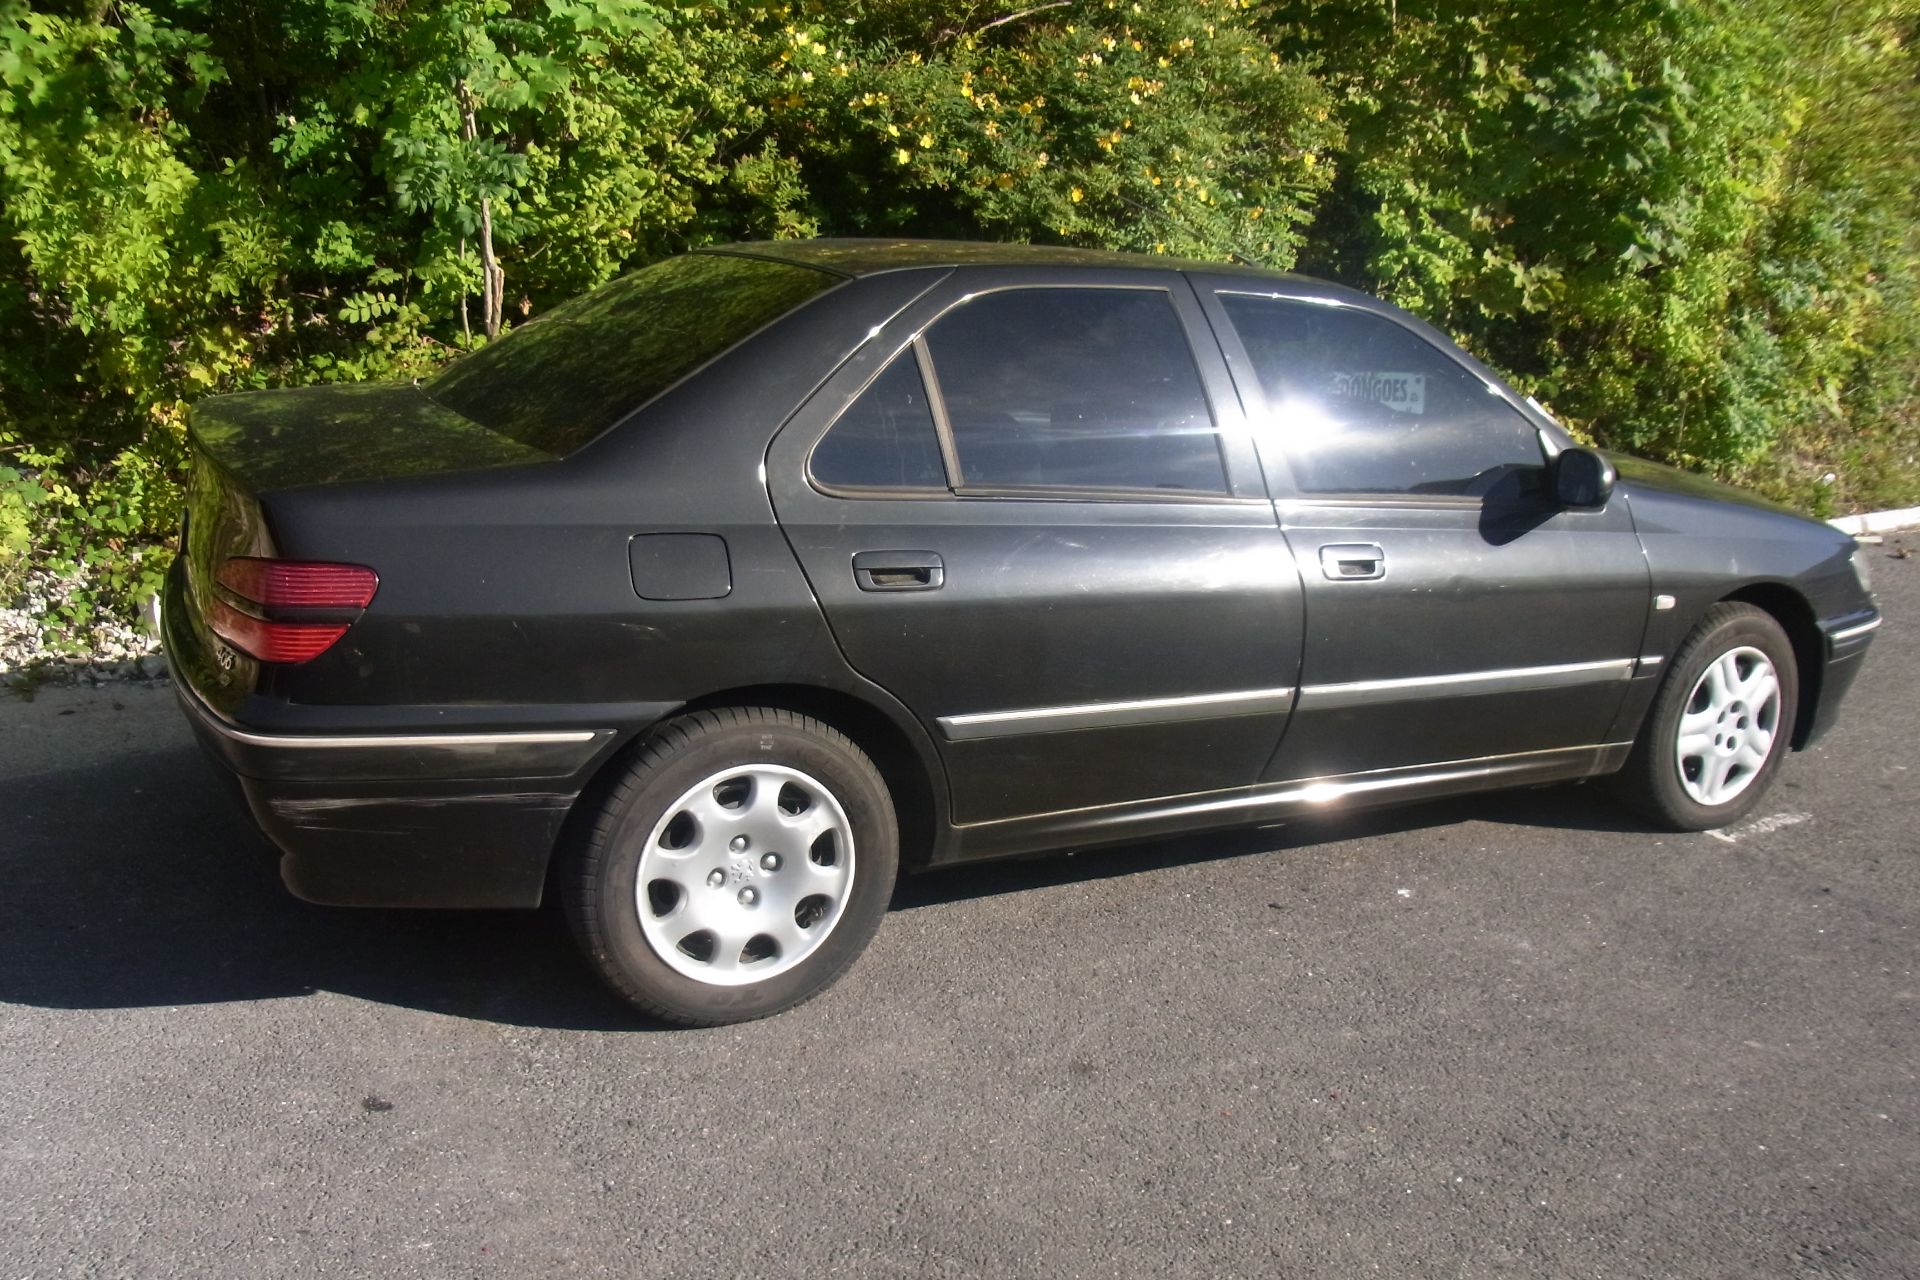 Y68 LGW - Peugeot 406 L HDI (90) with V5 - No Keys - Image 2 of 3